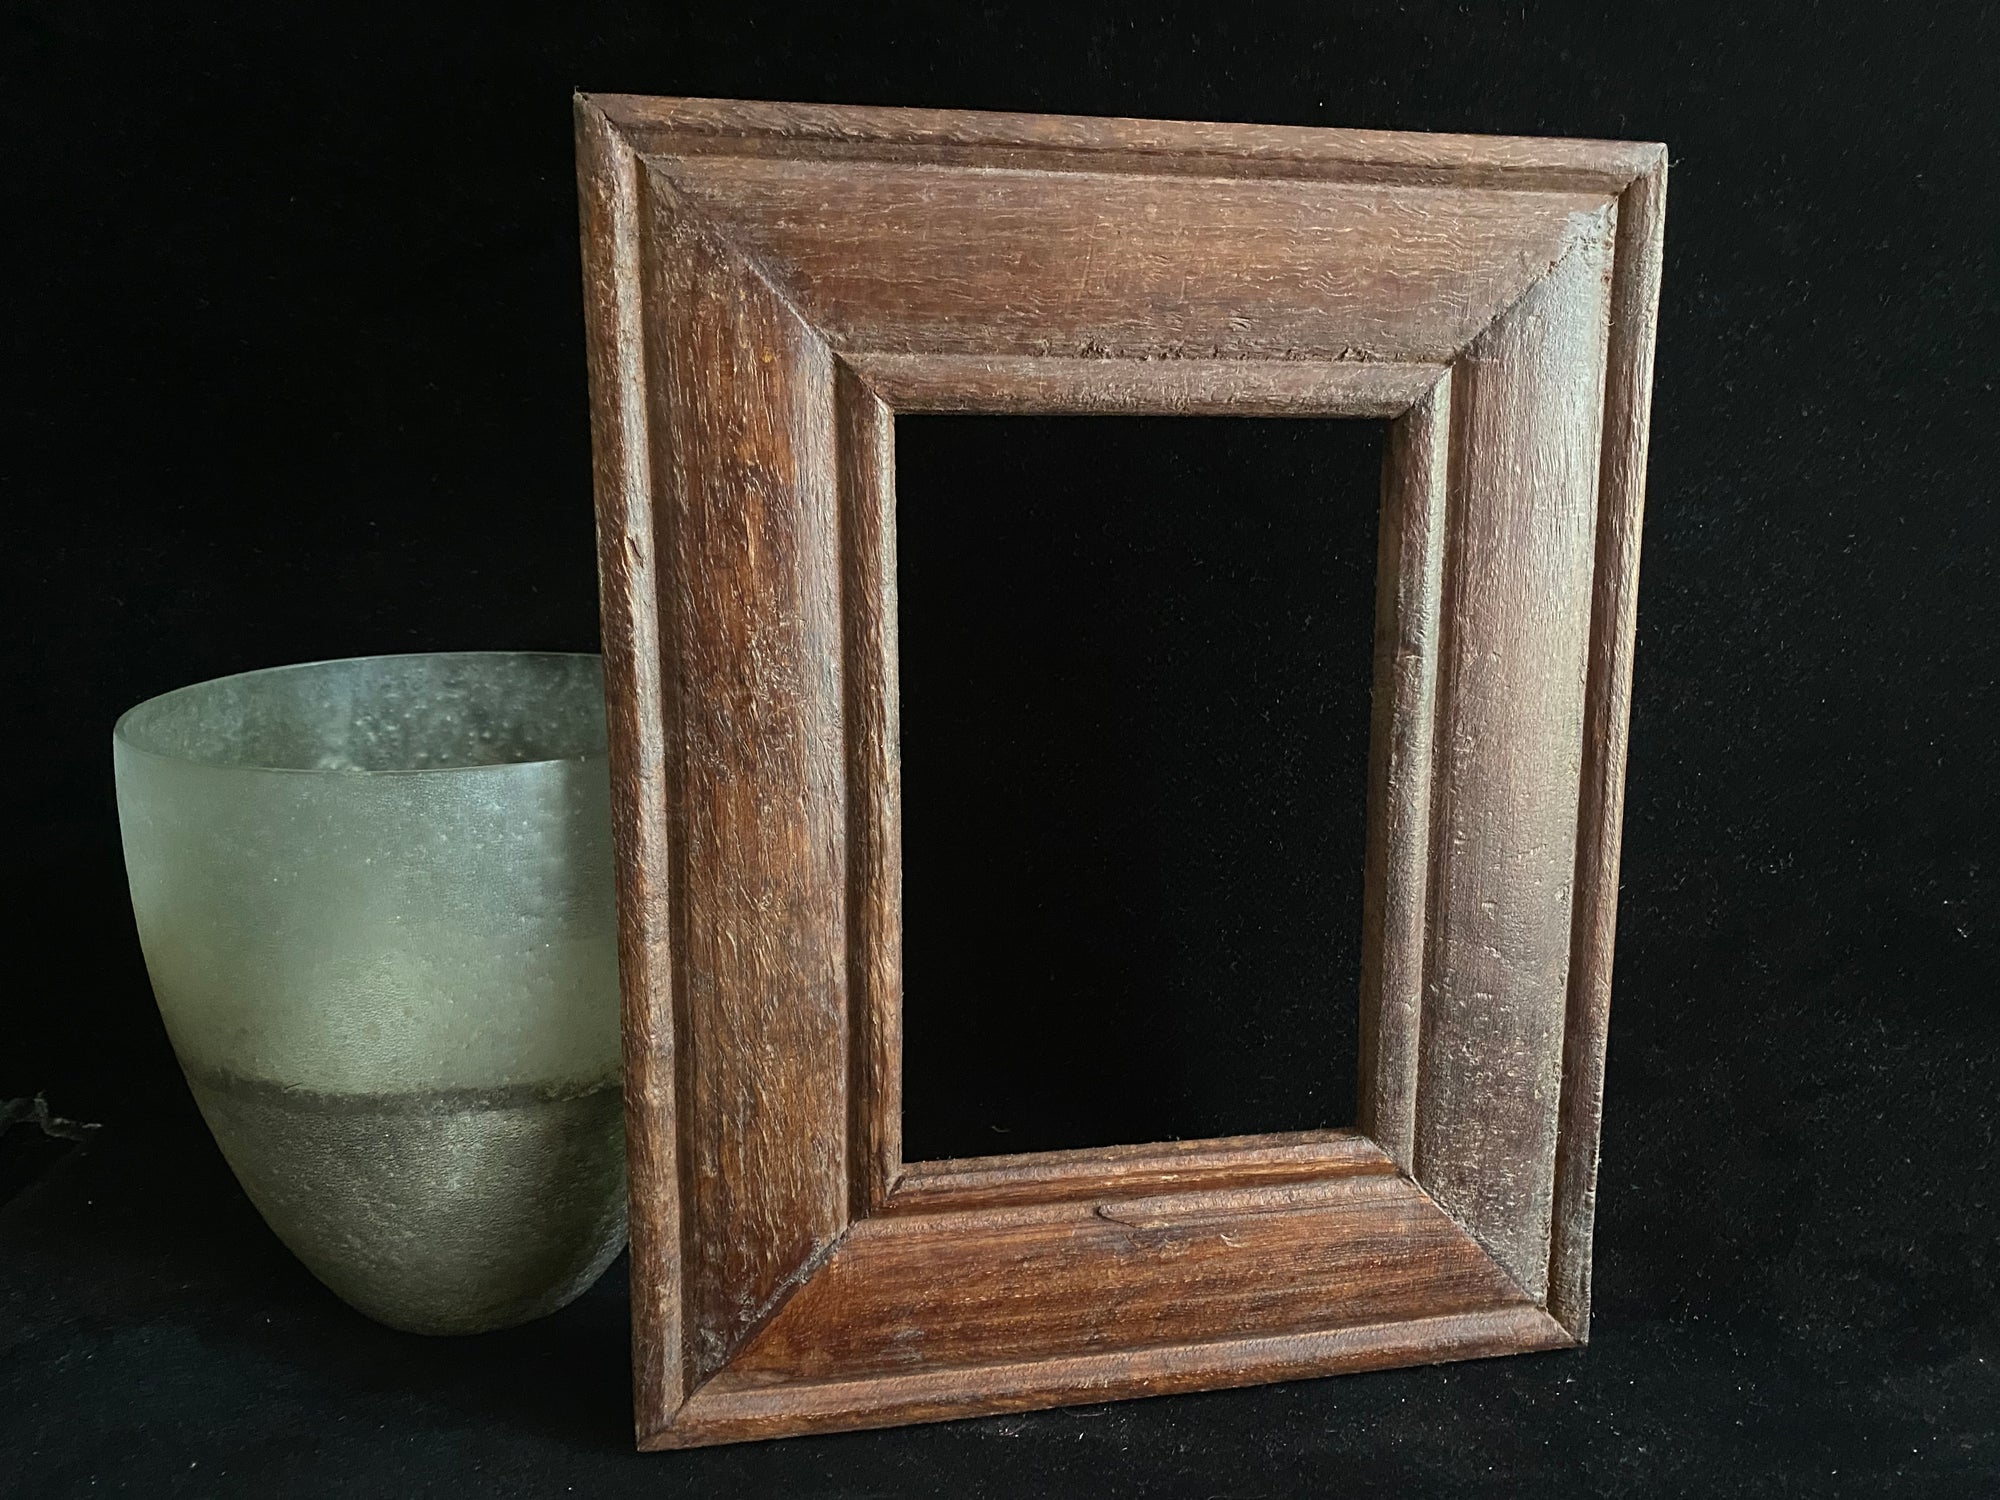 Rustic solid hardwood picture frame with a simple turned finish. Two sizes available: small 5x4"and large 14x10"